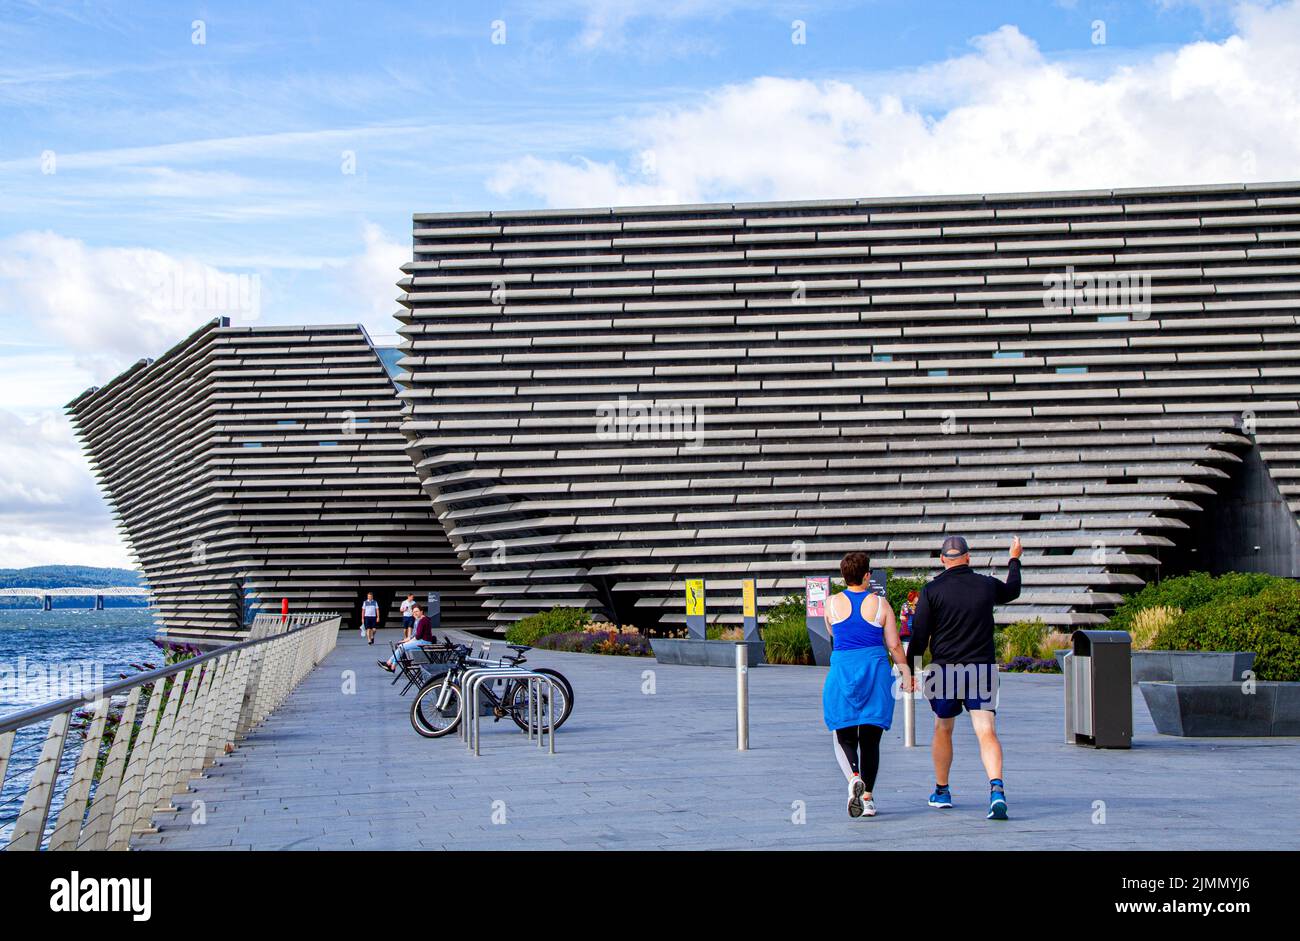 Dundee, Tayside, Scotland, UK. 7th Aug, 2022. UK Weather: North East Scotland experienced temperatures of 22°C during glorious sunbursts and the occasional strong breeze. A few tourists stopped by the RRS Discovery ship and the V&A Design Museum along the Dundee Waterfront because it was such a beautiful Sunday morning. Credit: Dundee Photographics/Alamy Live News Stock Photo